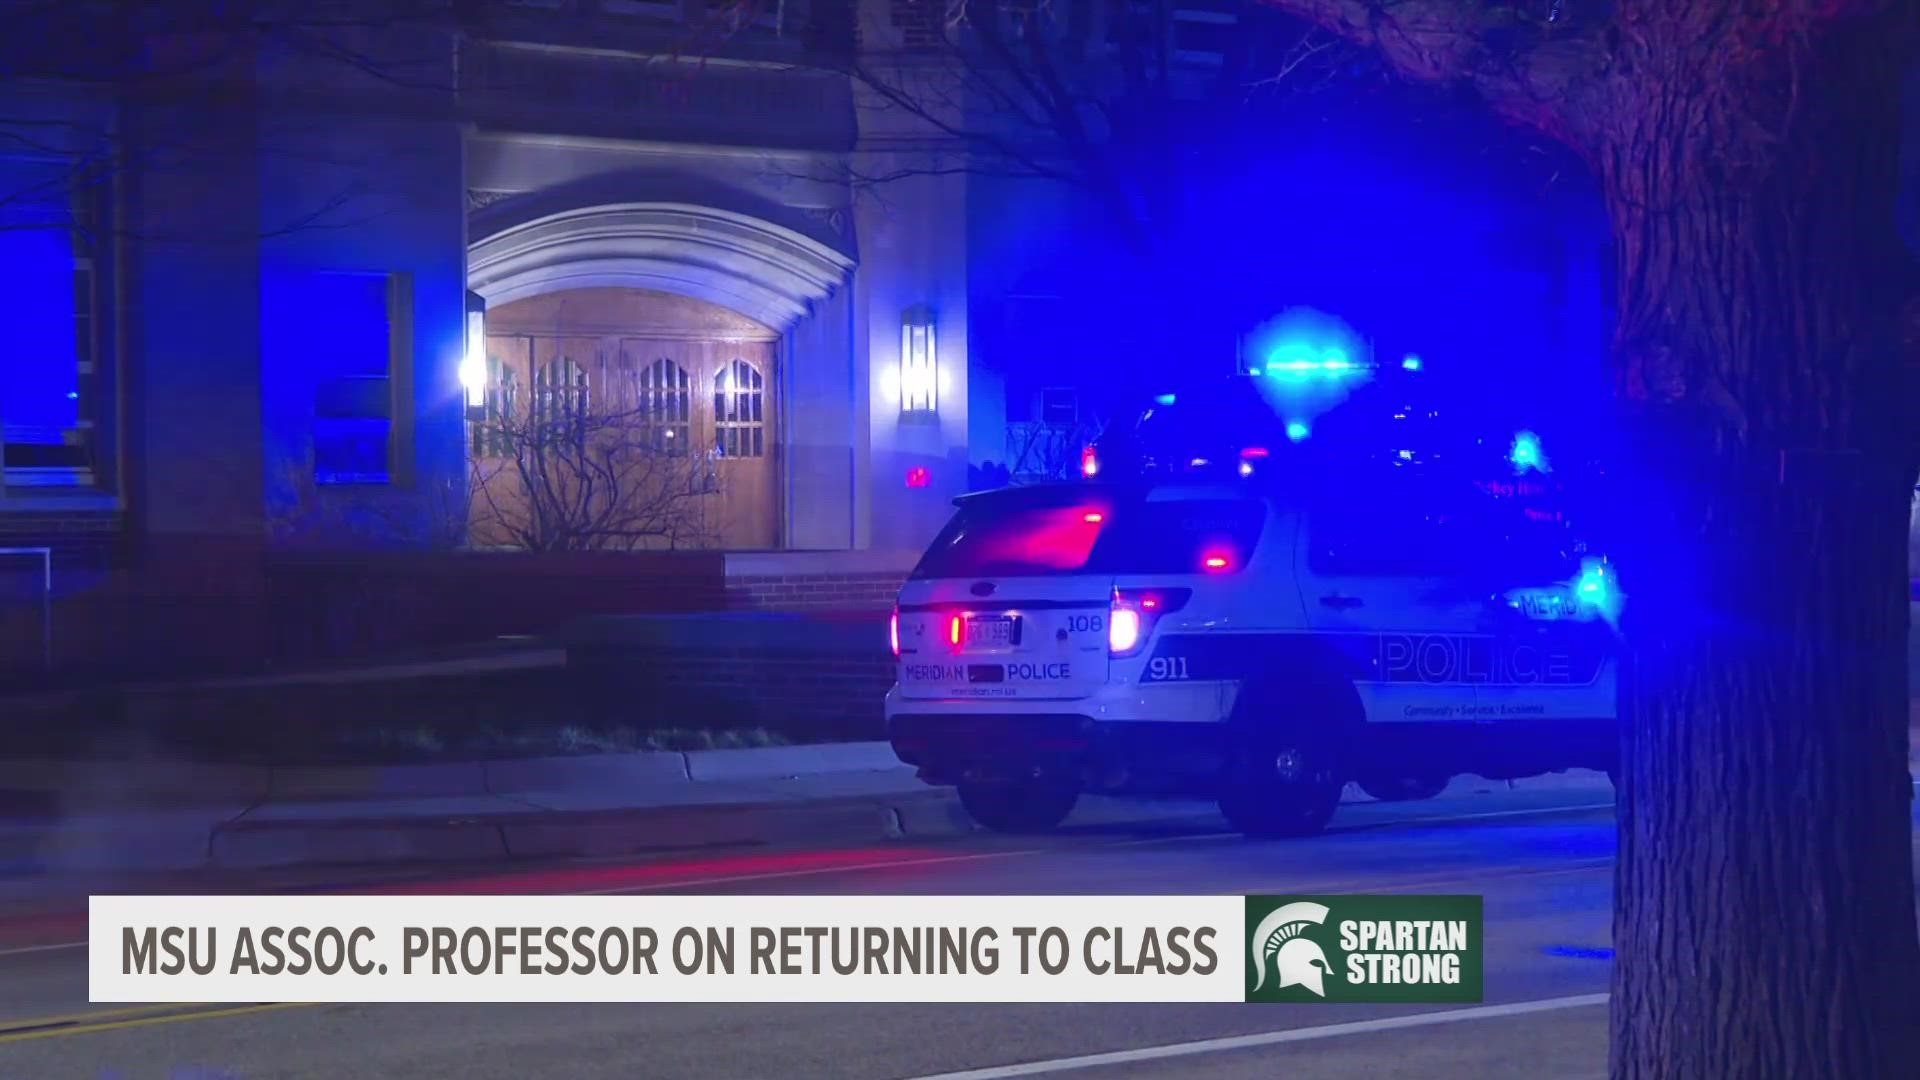 Associate Professor Mitchell Robinson's son was at the MSU Union during the mass shooting, and one of his students was hurt.